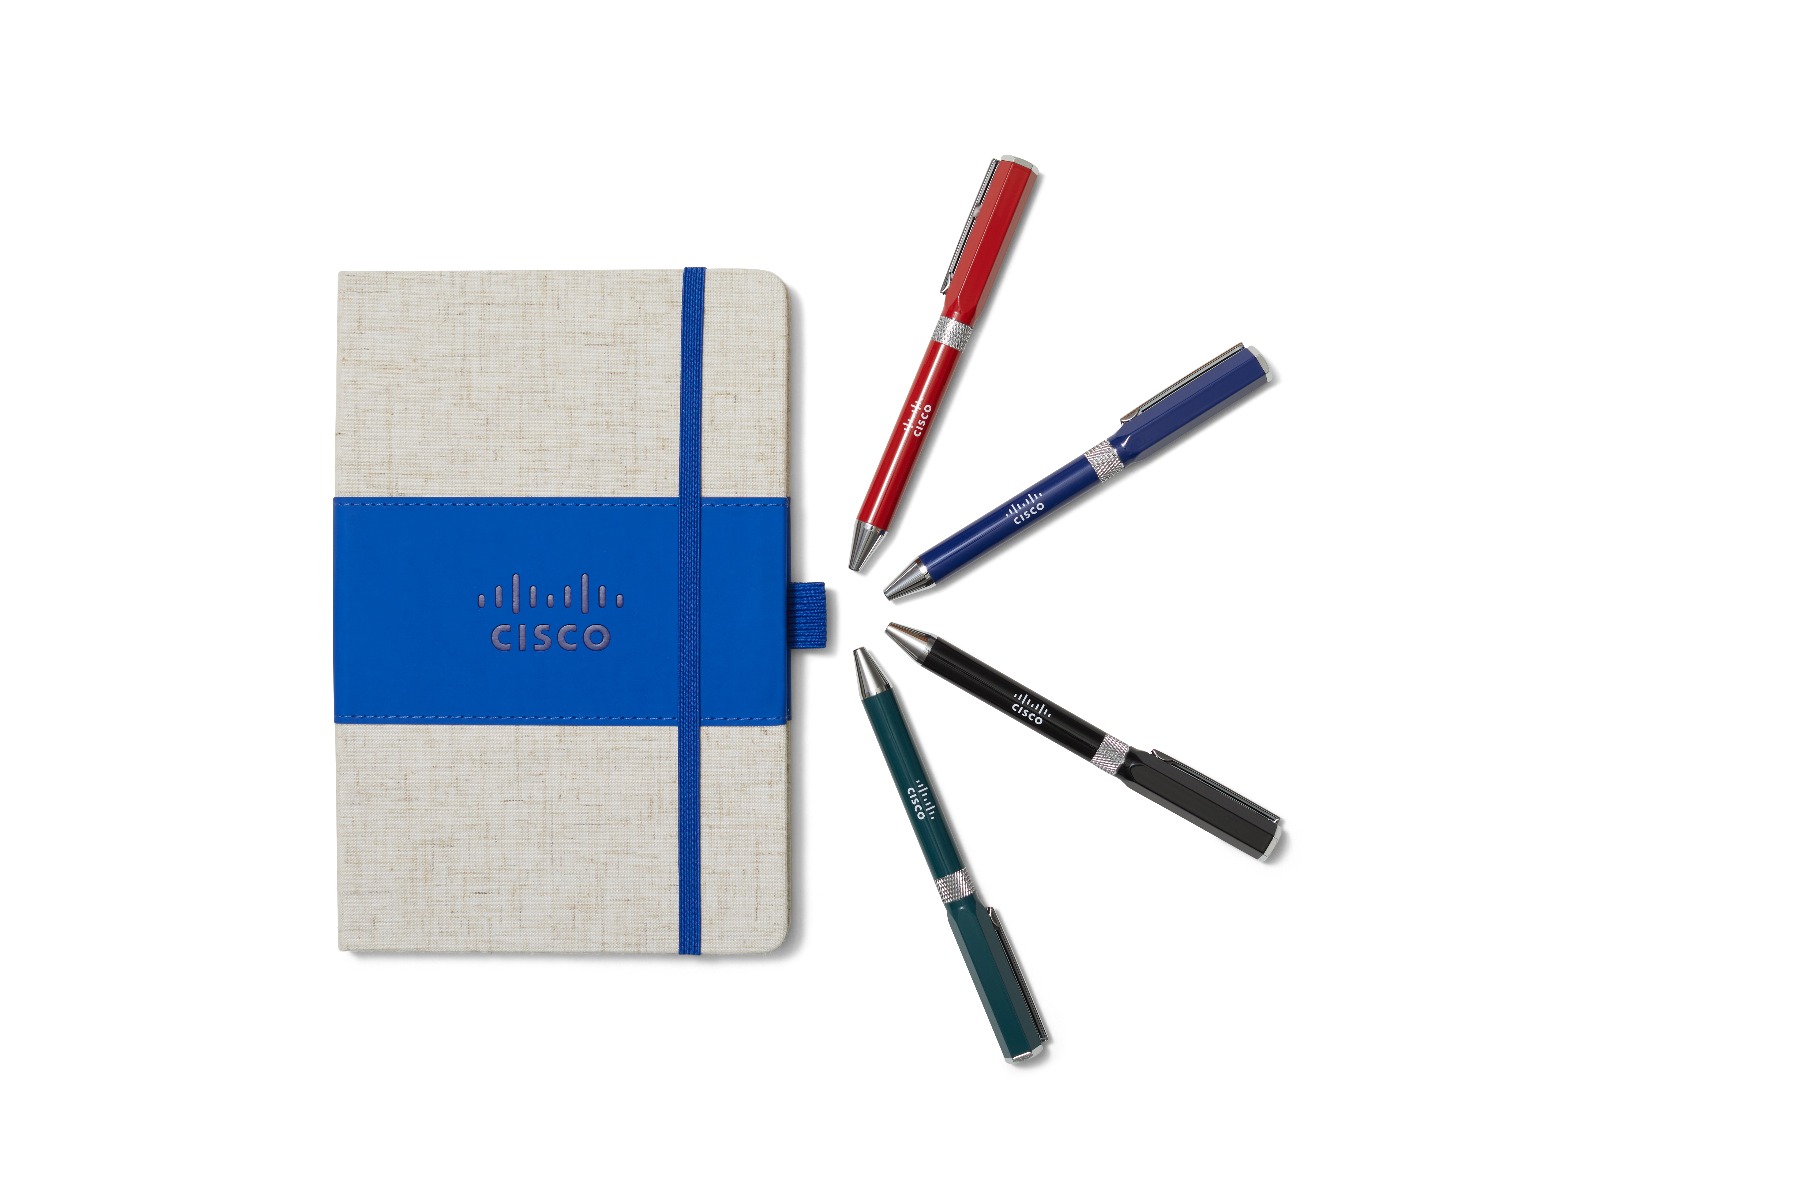 Cisco Store products